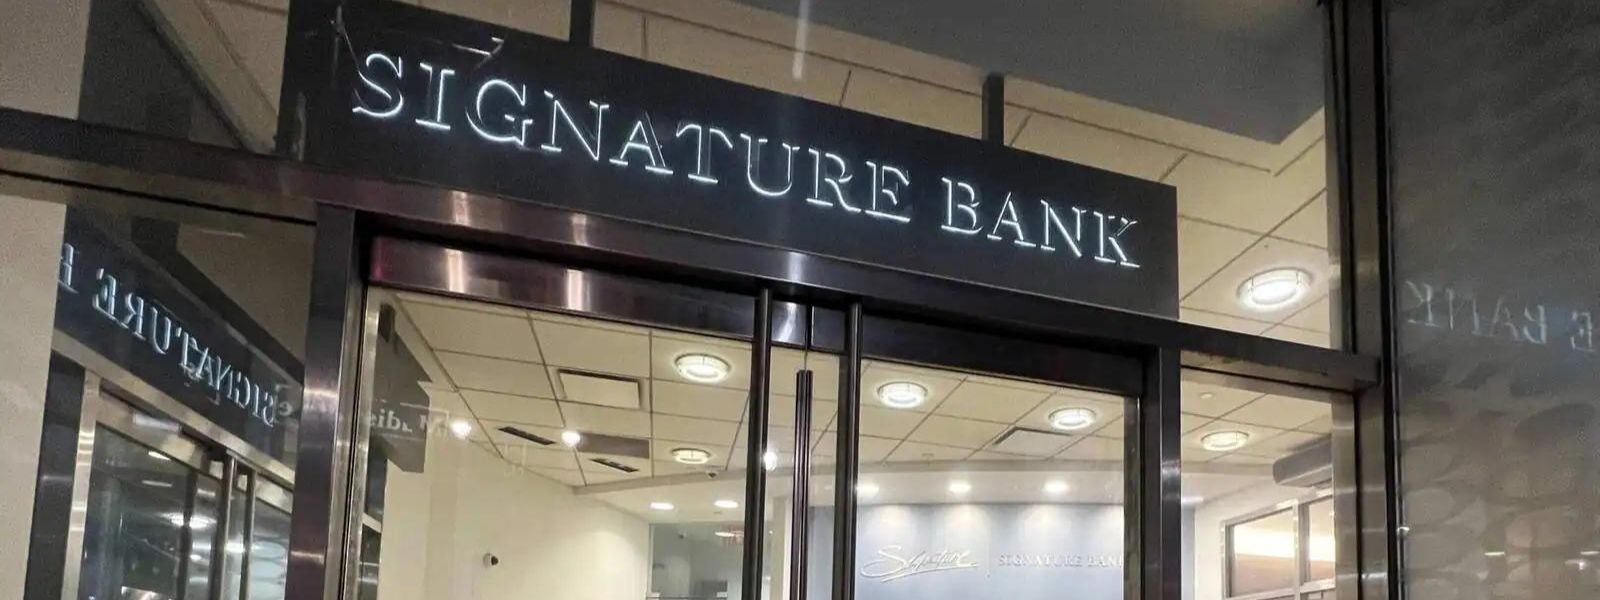 New York state takes over Signature Bank, second U.S. bank to fall within days